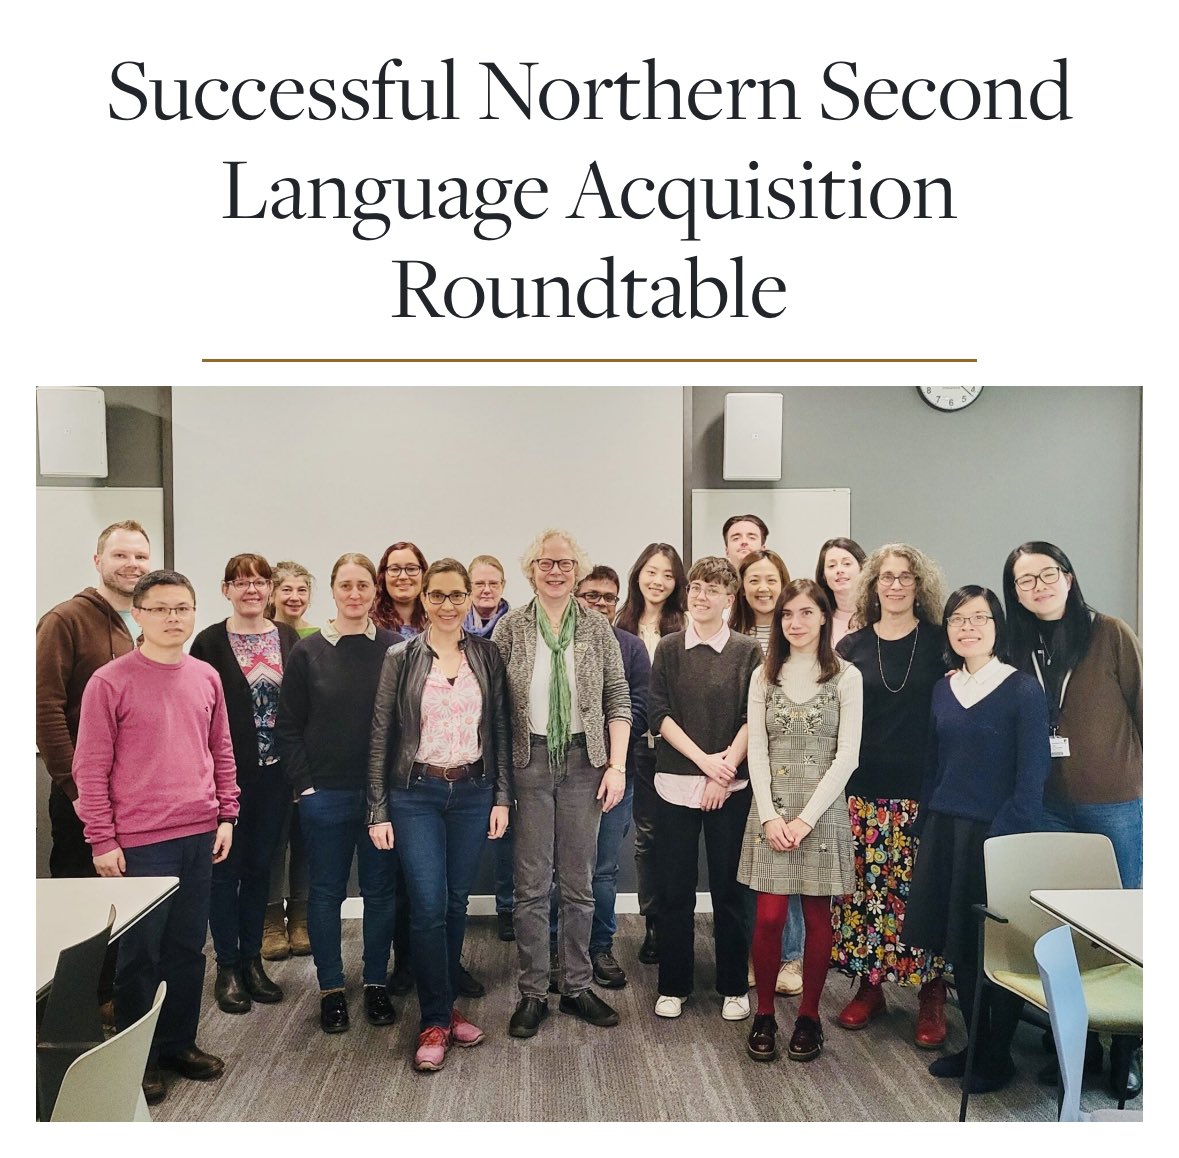 Congratulations to Clare Wright (@LCSLeeds) and Monika Schmid (@UoYLangLing) who organised last week’s very successful Northern Second Language Acquisition Roundtable at @UniversityLeeds! We already look forward to the next event! celt.leeds.ac.uk/news/successfu…